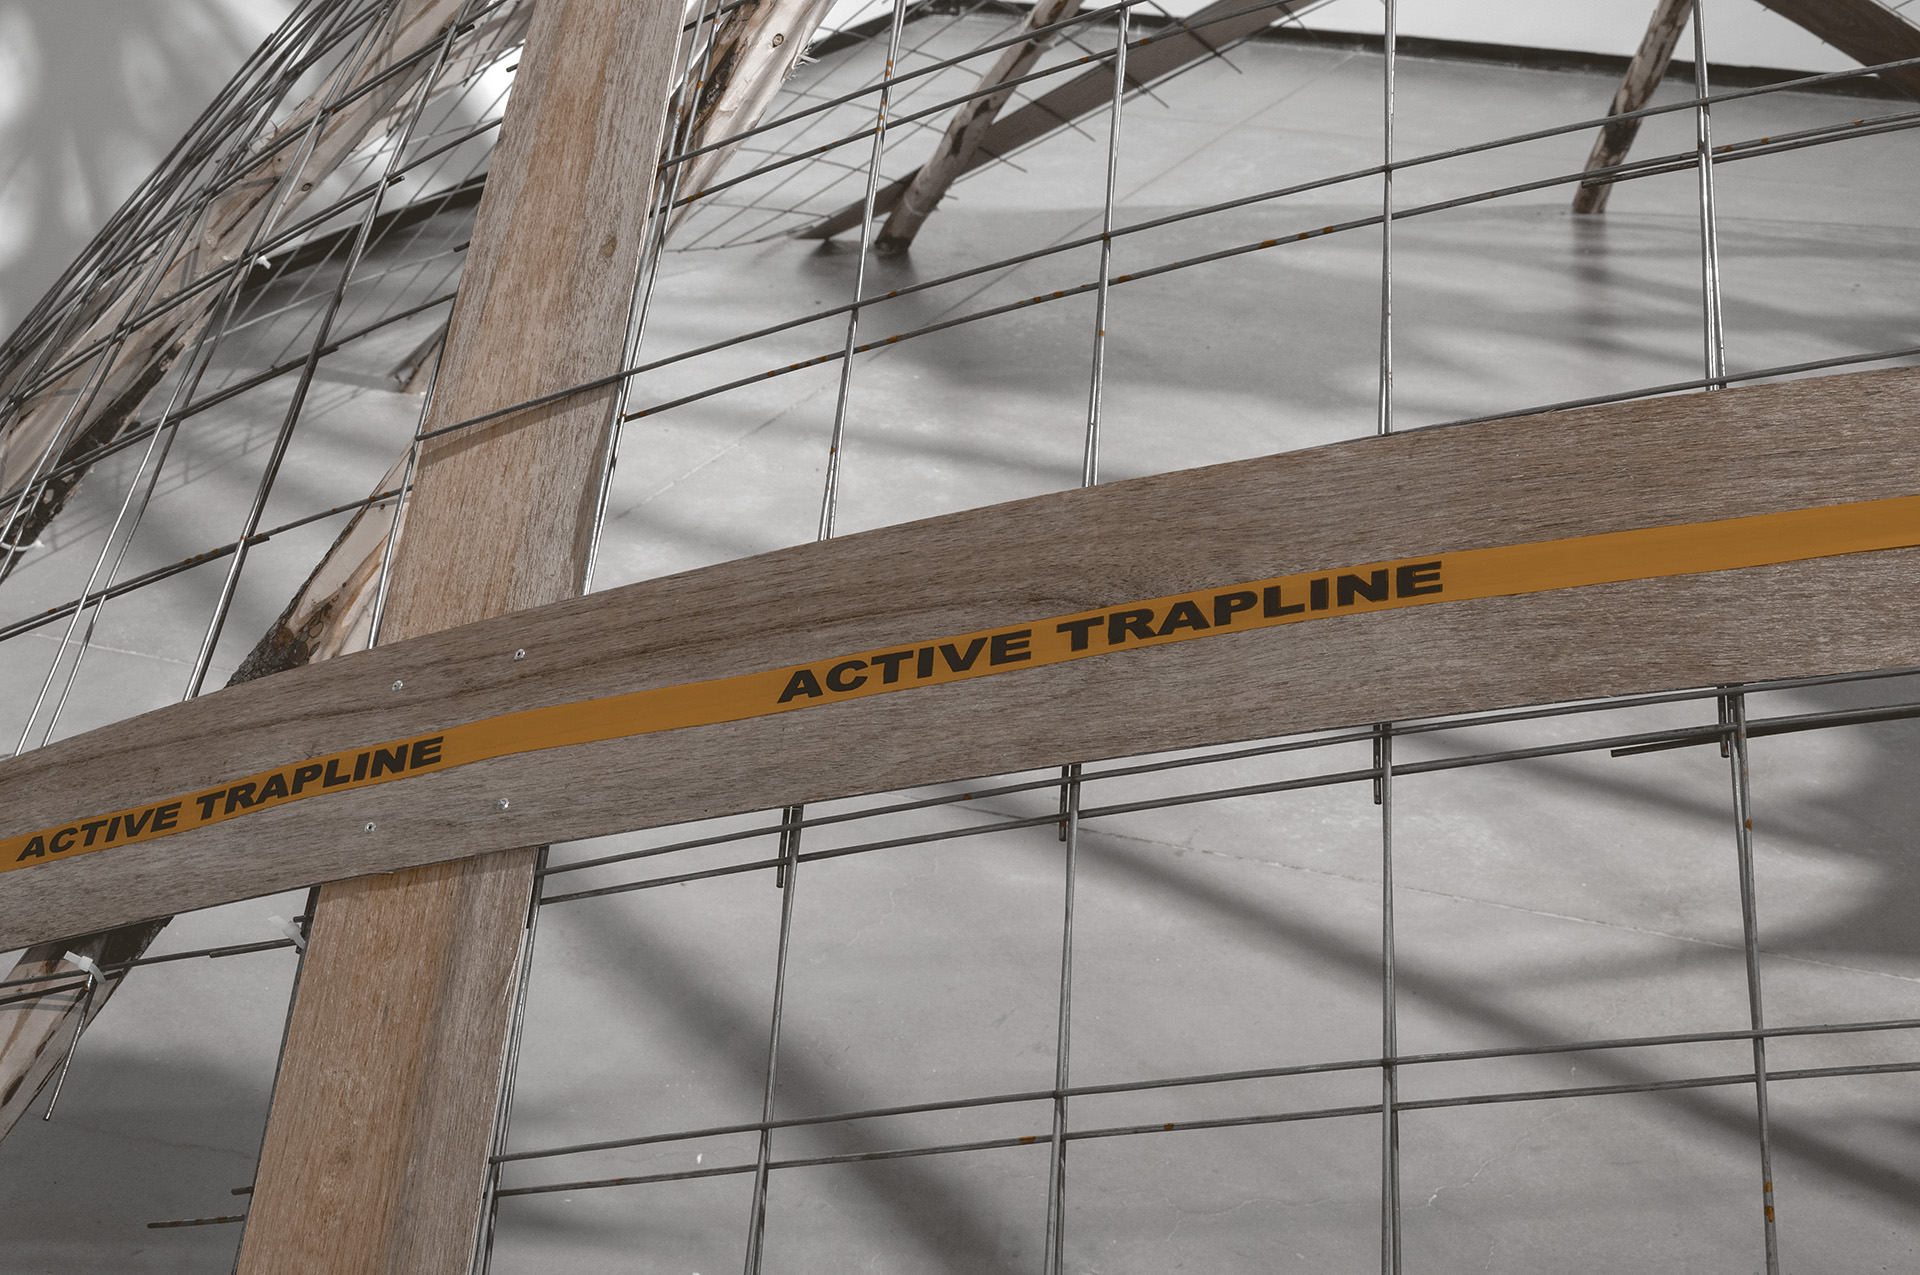 Sepia detail of a wire mesh structure with wooden crossbeams with a band of “Active trapline” text